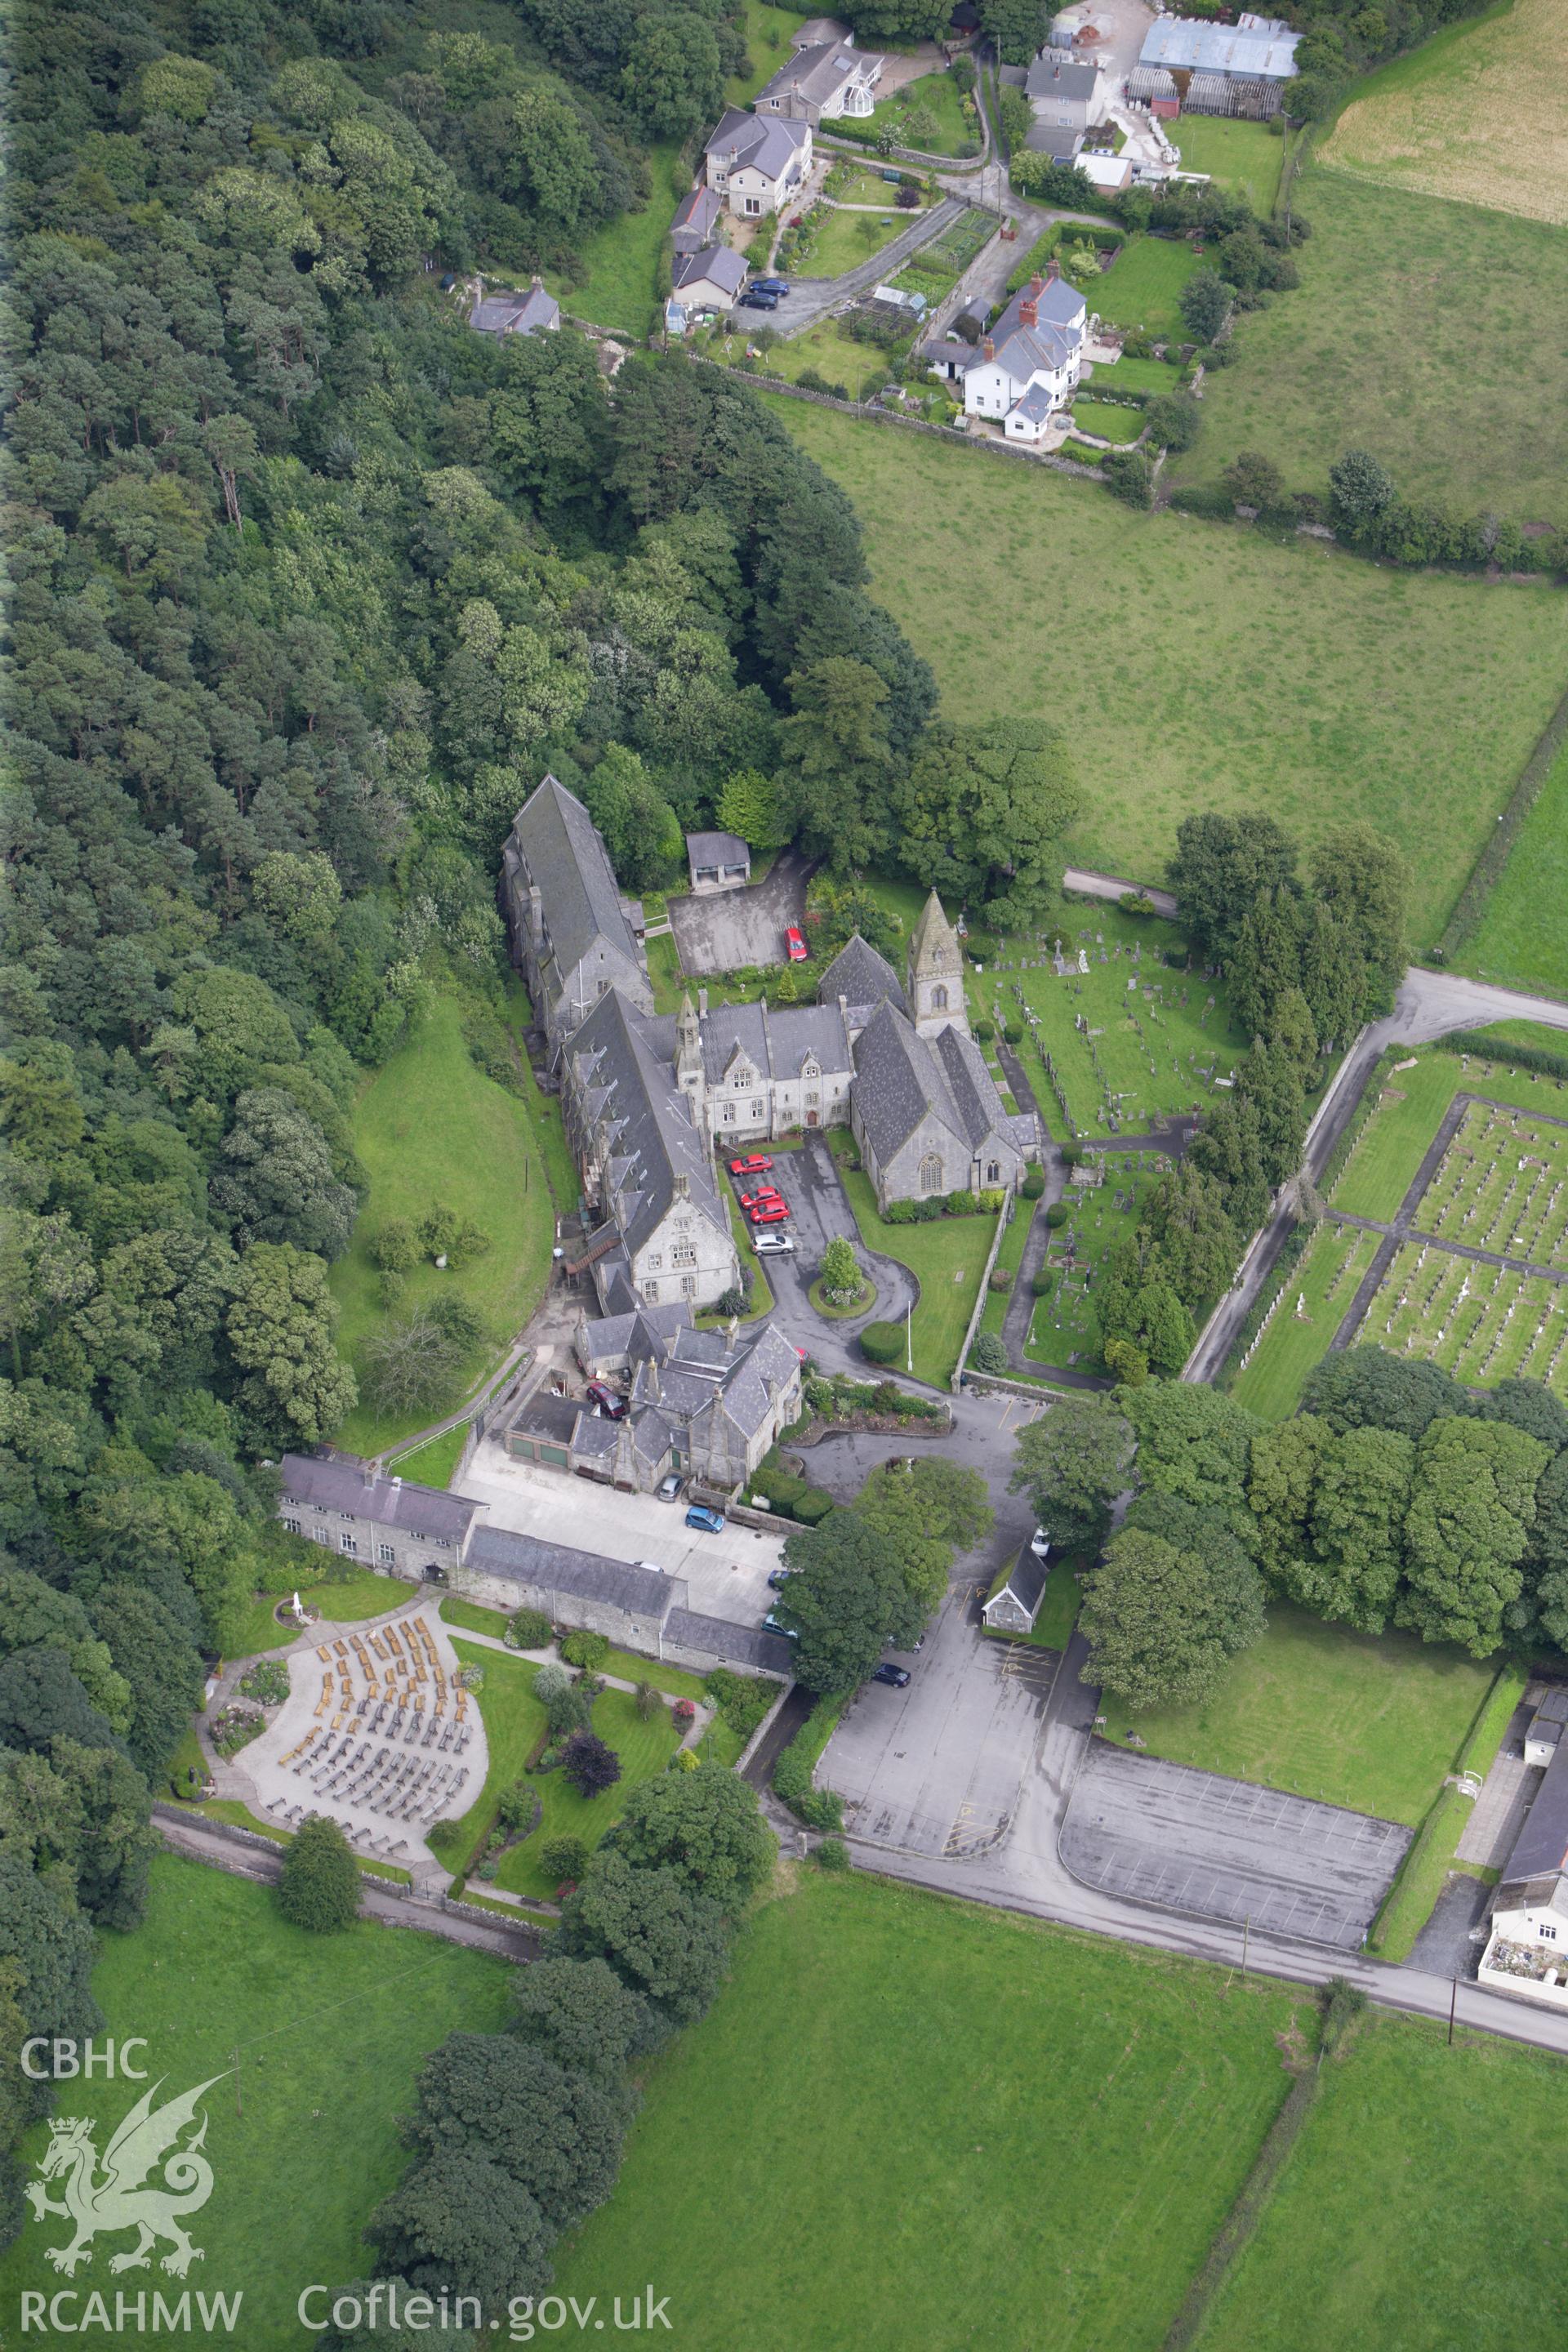 RCAHMW colour oblique aerial photograph of St David's Church, Pantasaph. Taken on 30 July 2009 by Toby Driver